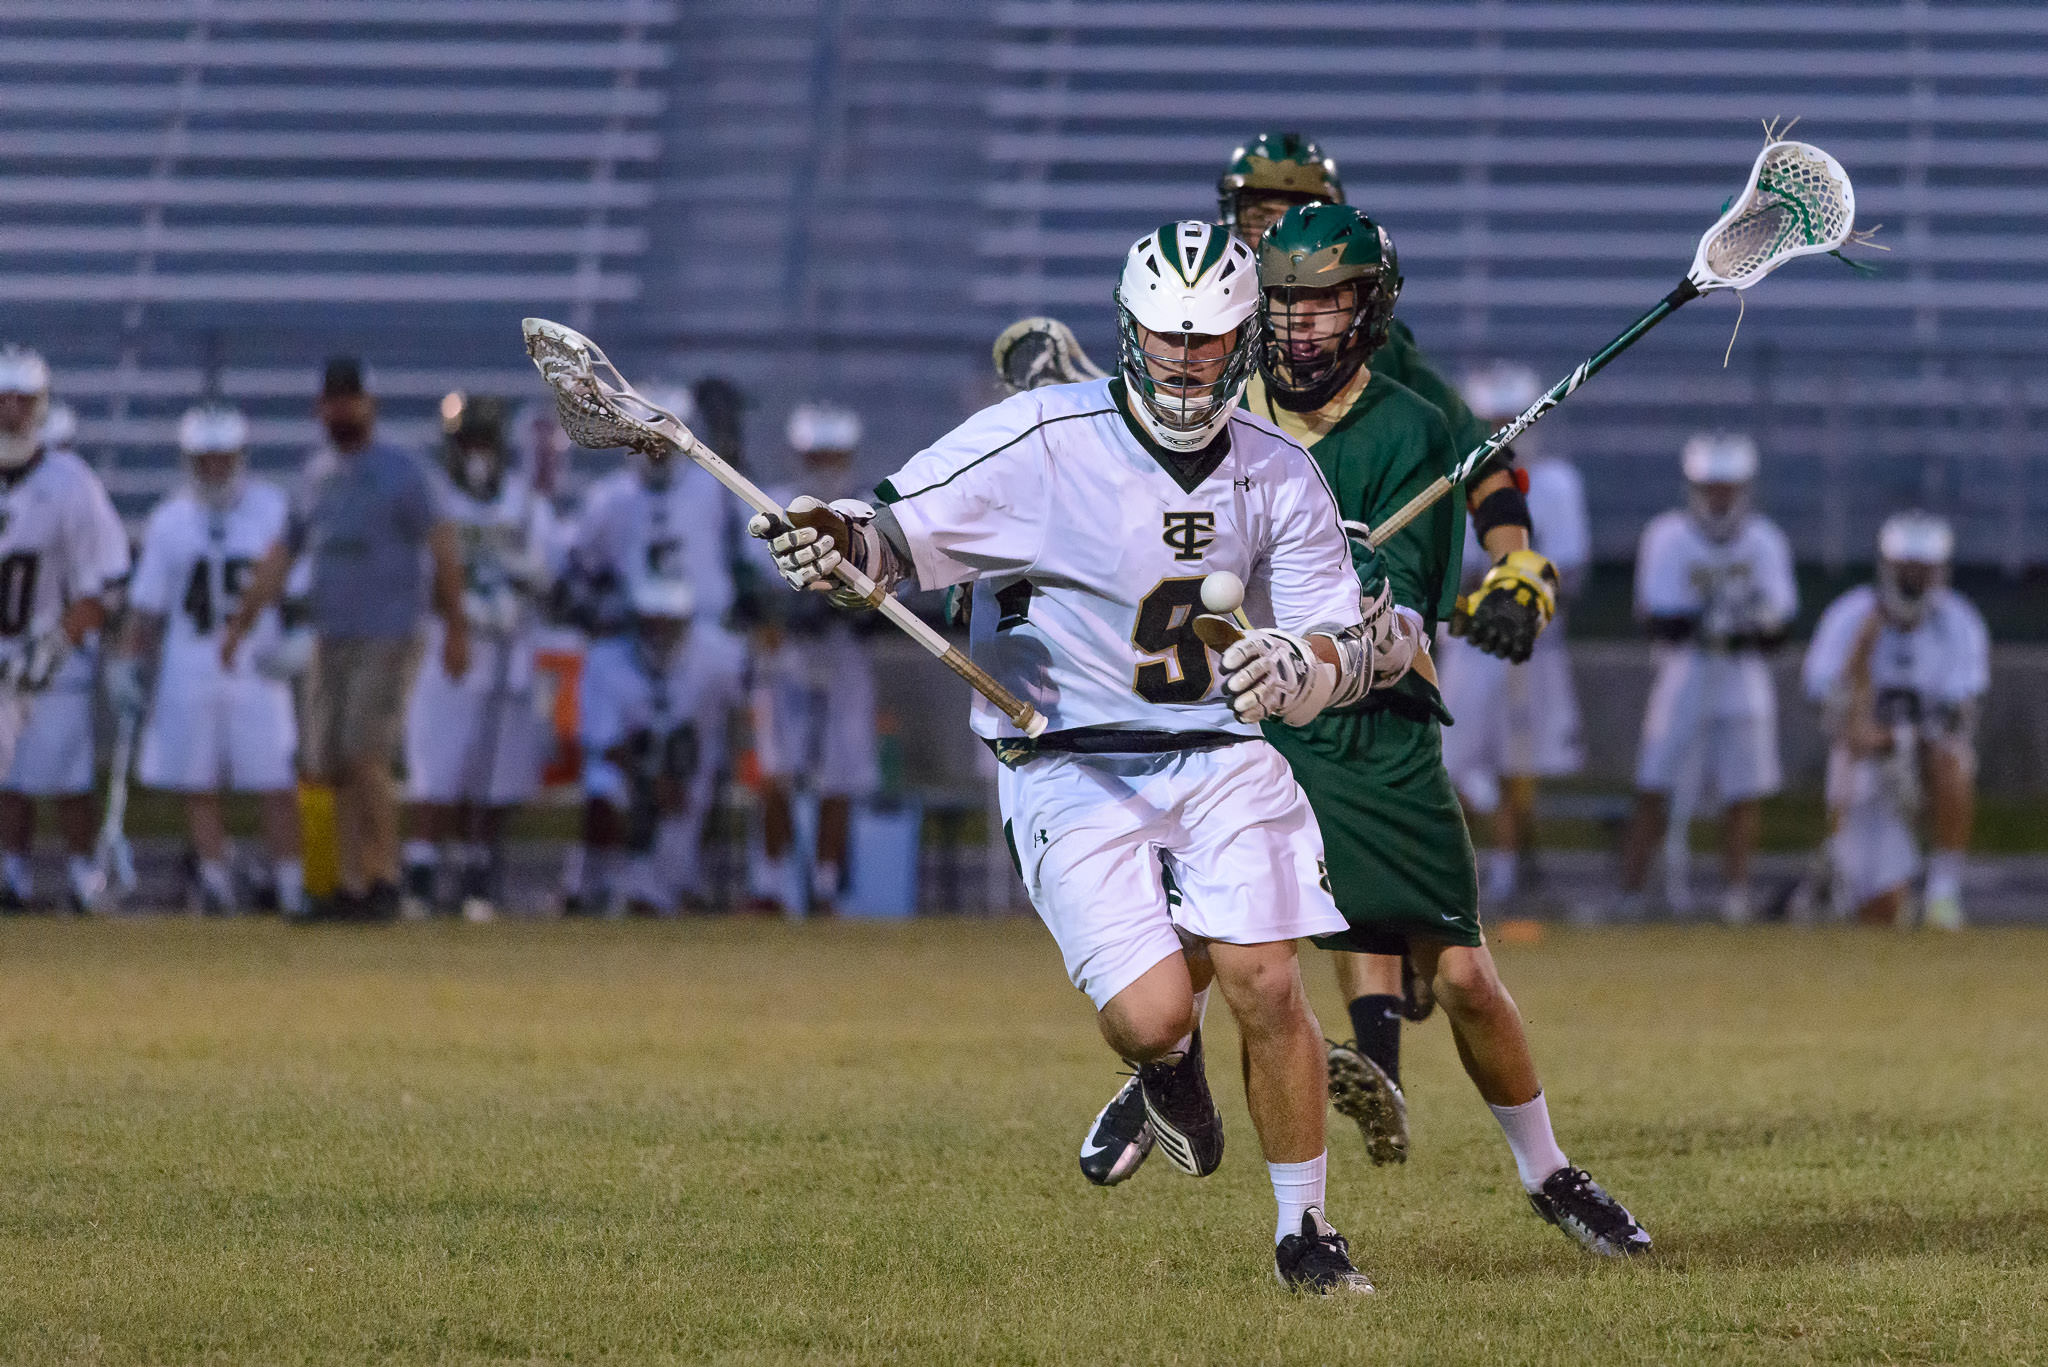 Photographing High School Lacrosse